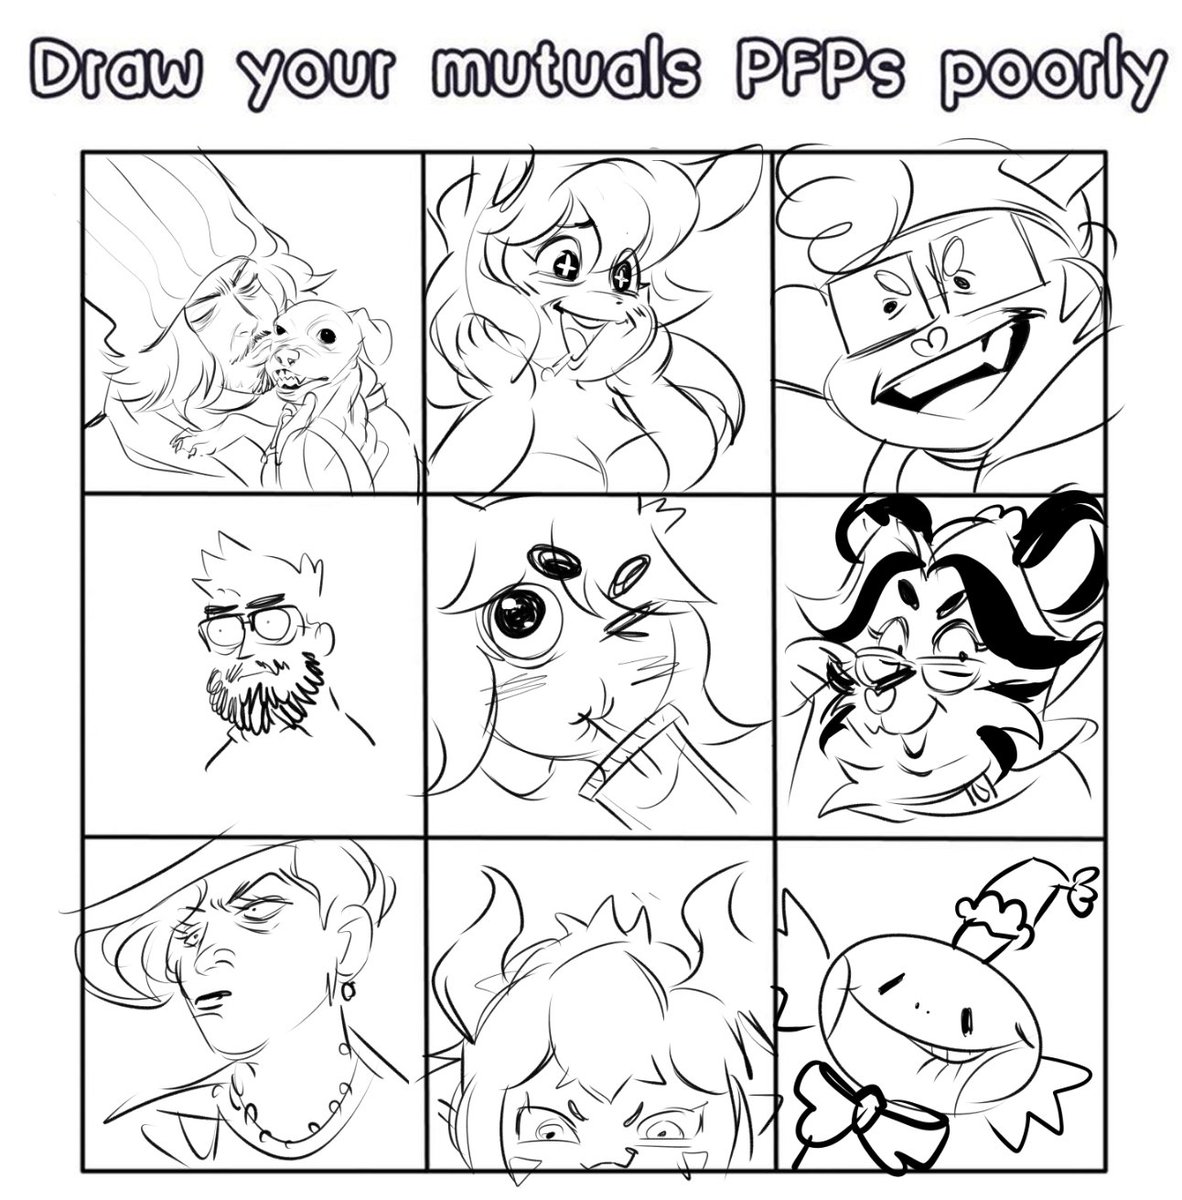 I know most ppl do quick colours for this, but I wanted them to keep looking especially shitty ❤️, each was done at the speed of light LMAO. In order: @TaiCheesy @bunsoir @Komoroshi @LumberZach07 @Hazelmocha @IB_xMichiyo @cainhurts @xenvitaVT @eisorus 